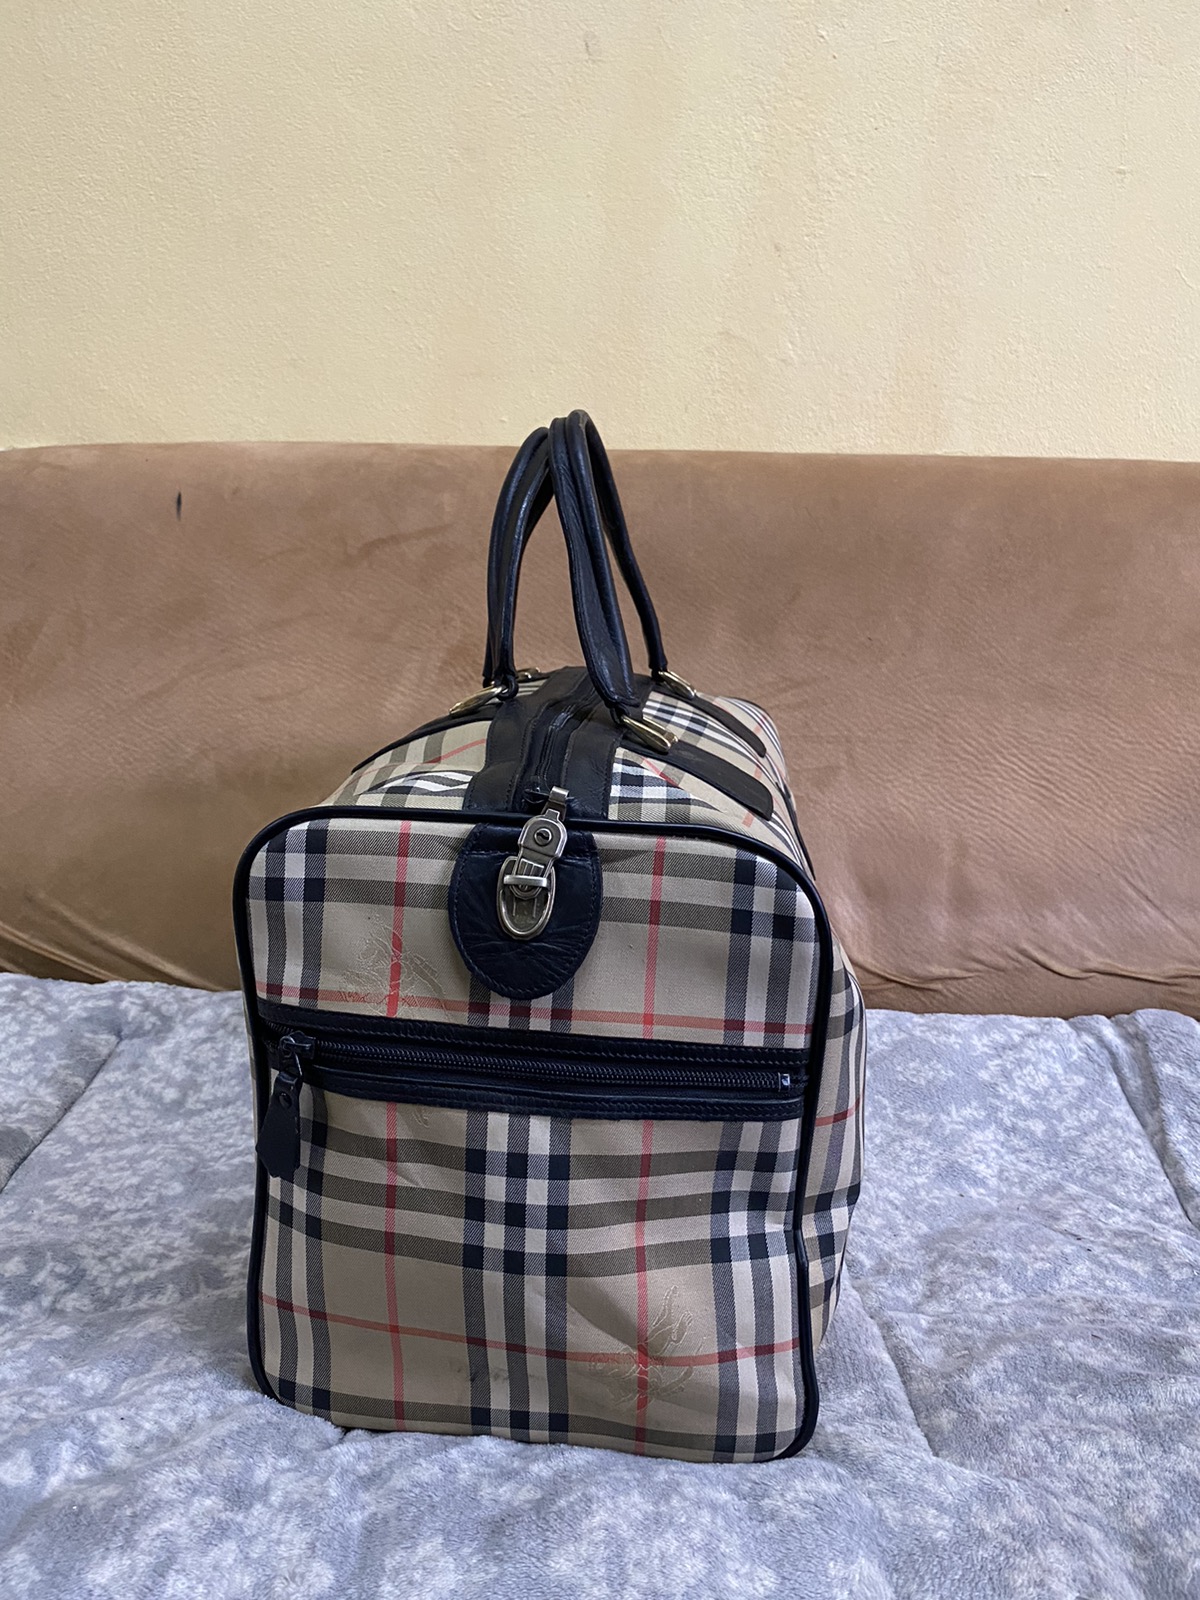 Steals💥 Burberry Leather Travel Bag - 7